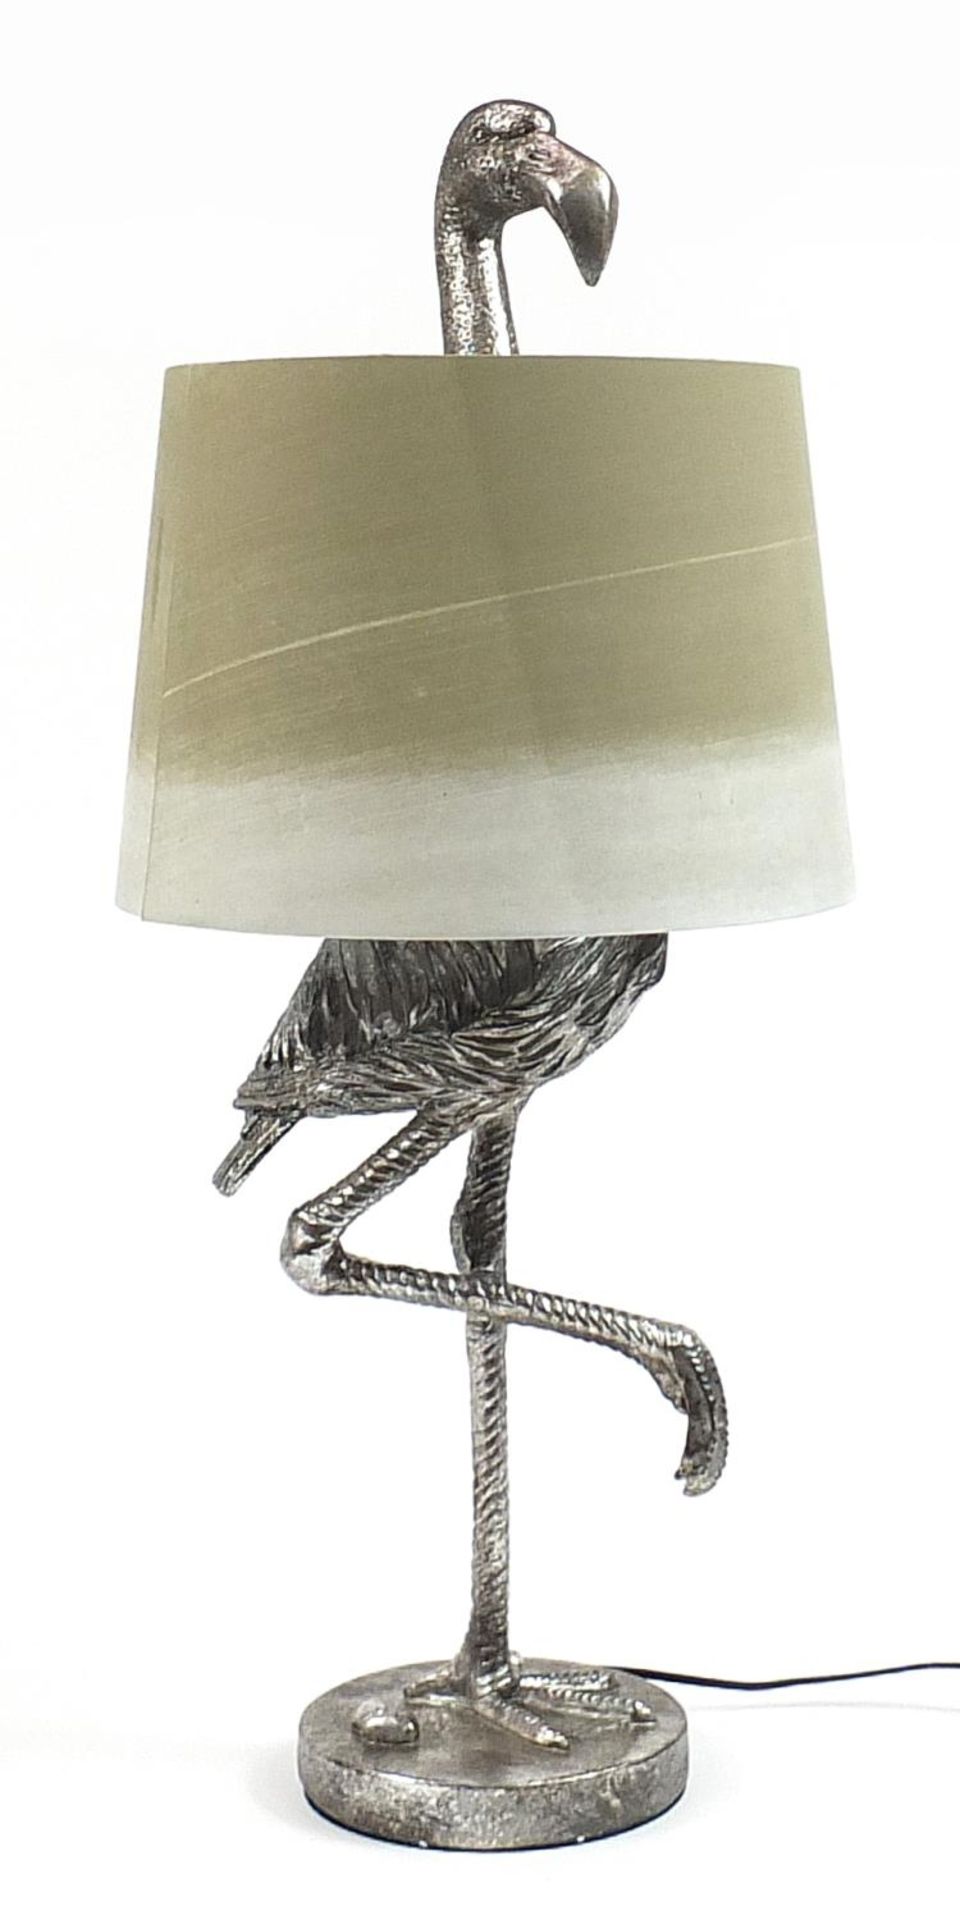 Silvered flamingo design table lamp with shade, 82cm high